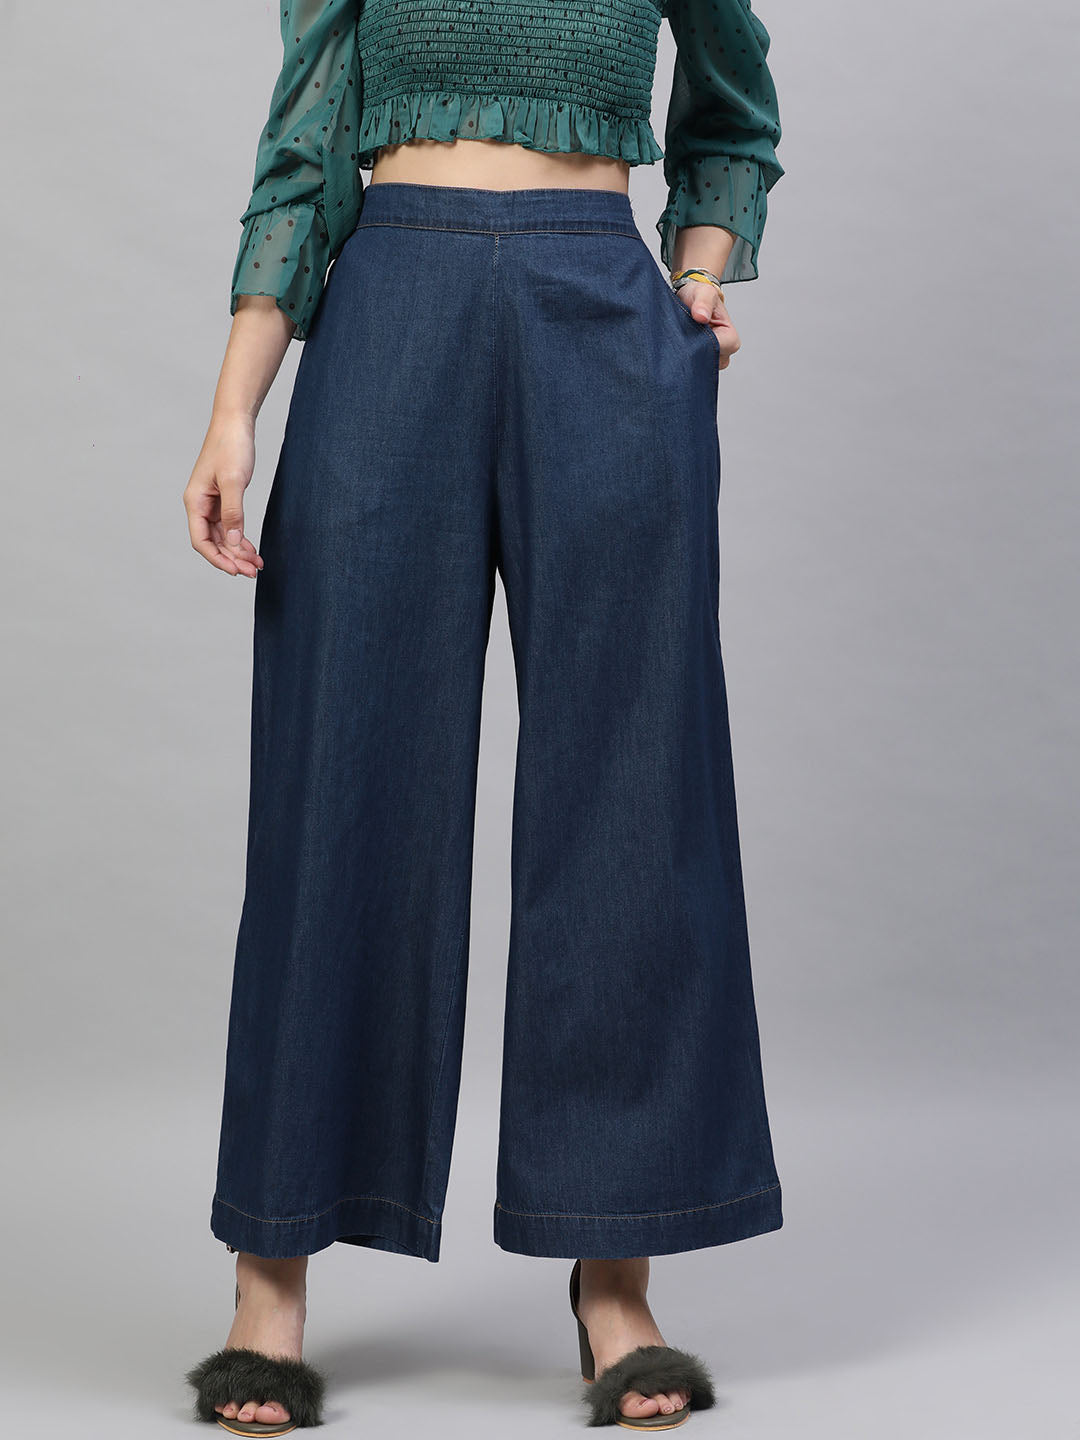 Stylish Solid Women Parallel Pant